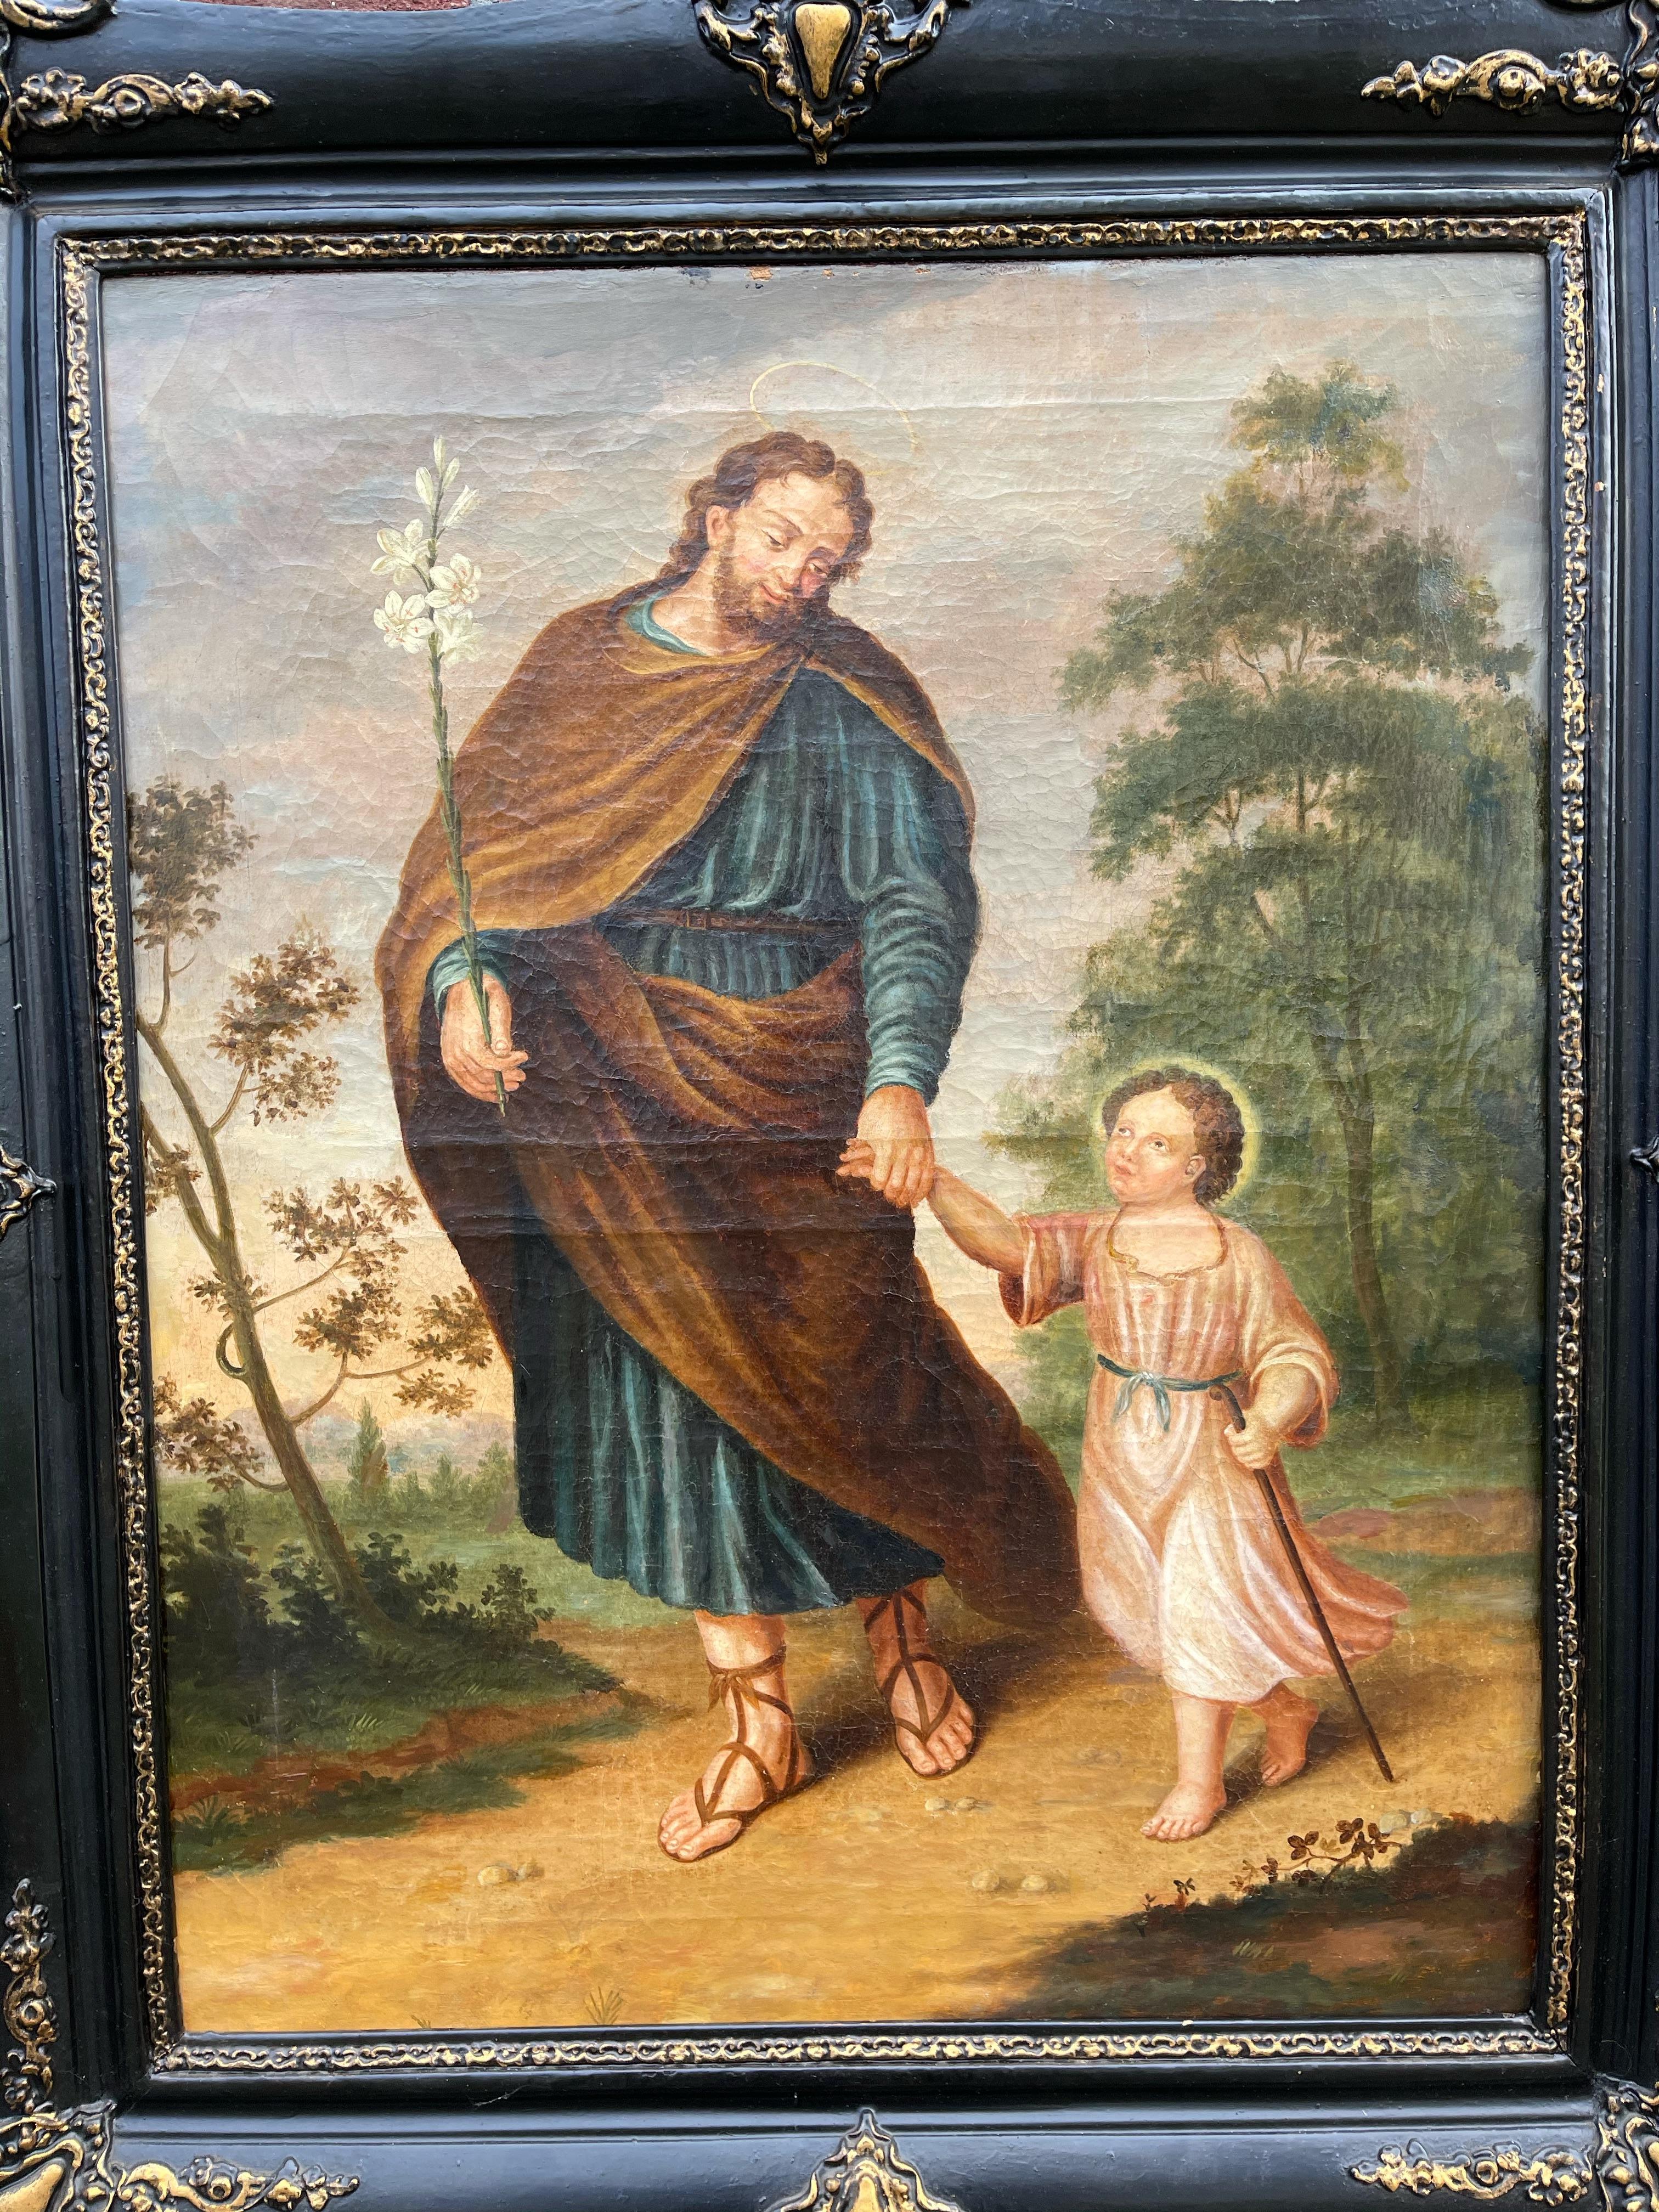 Early religious work of art, presented in the original antique frame.

This beautiful and uplifting portrait of Saint Joseph holding hands with the child Jesus is an oil on canvas and we date it to the 18th century and it is from the Baroque Revival